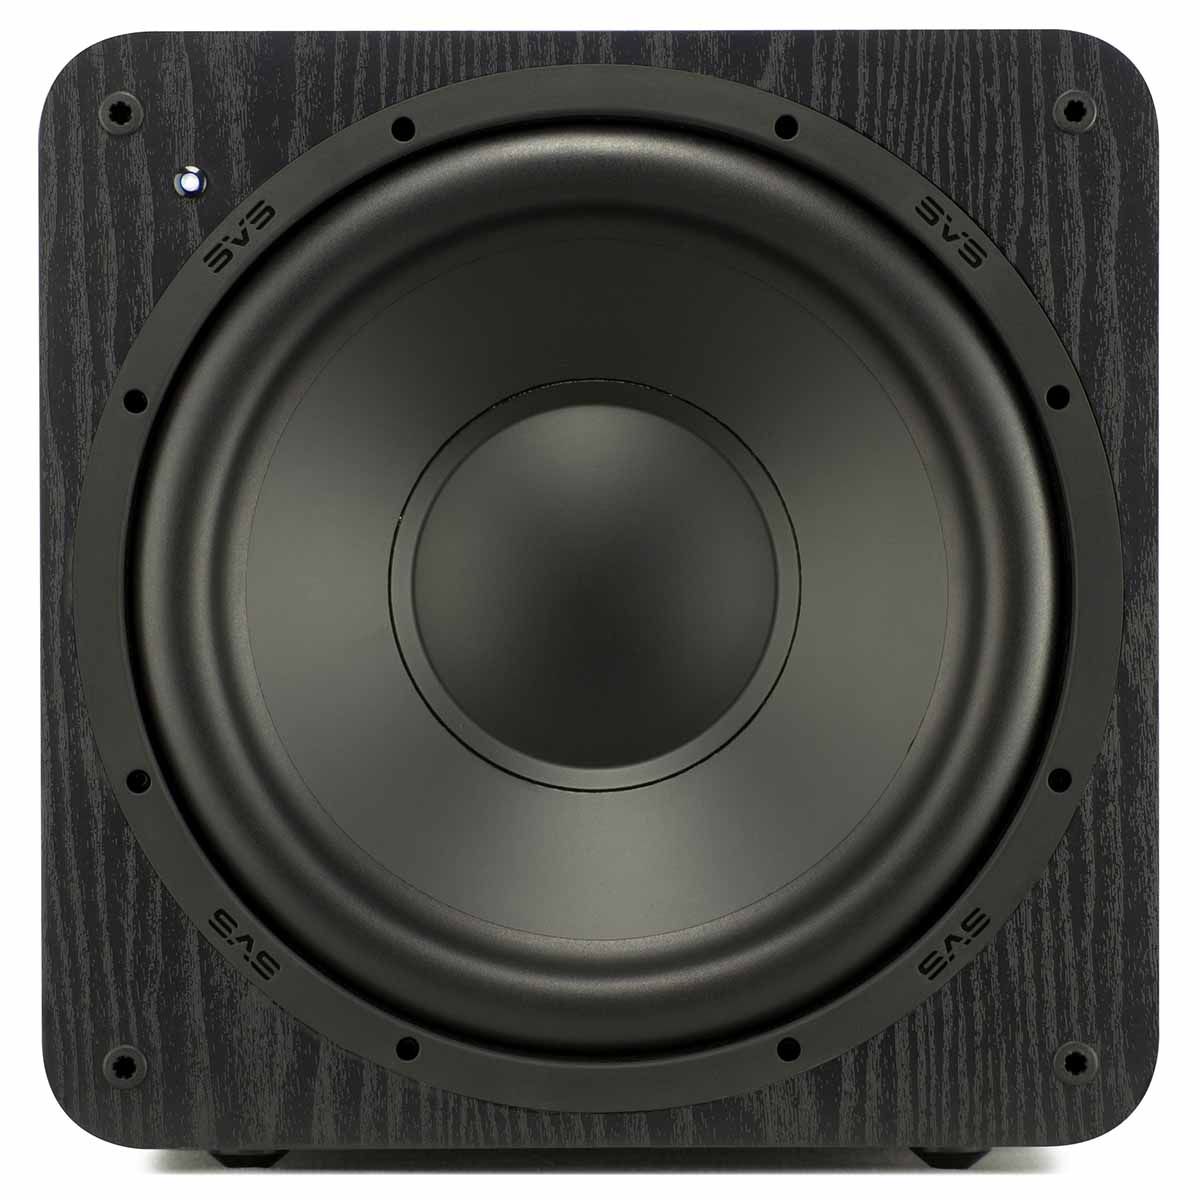 SVS SB-1000 12" Ultra Compact Sealed Subwoofer - front view without grille